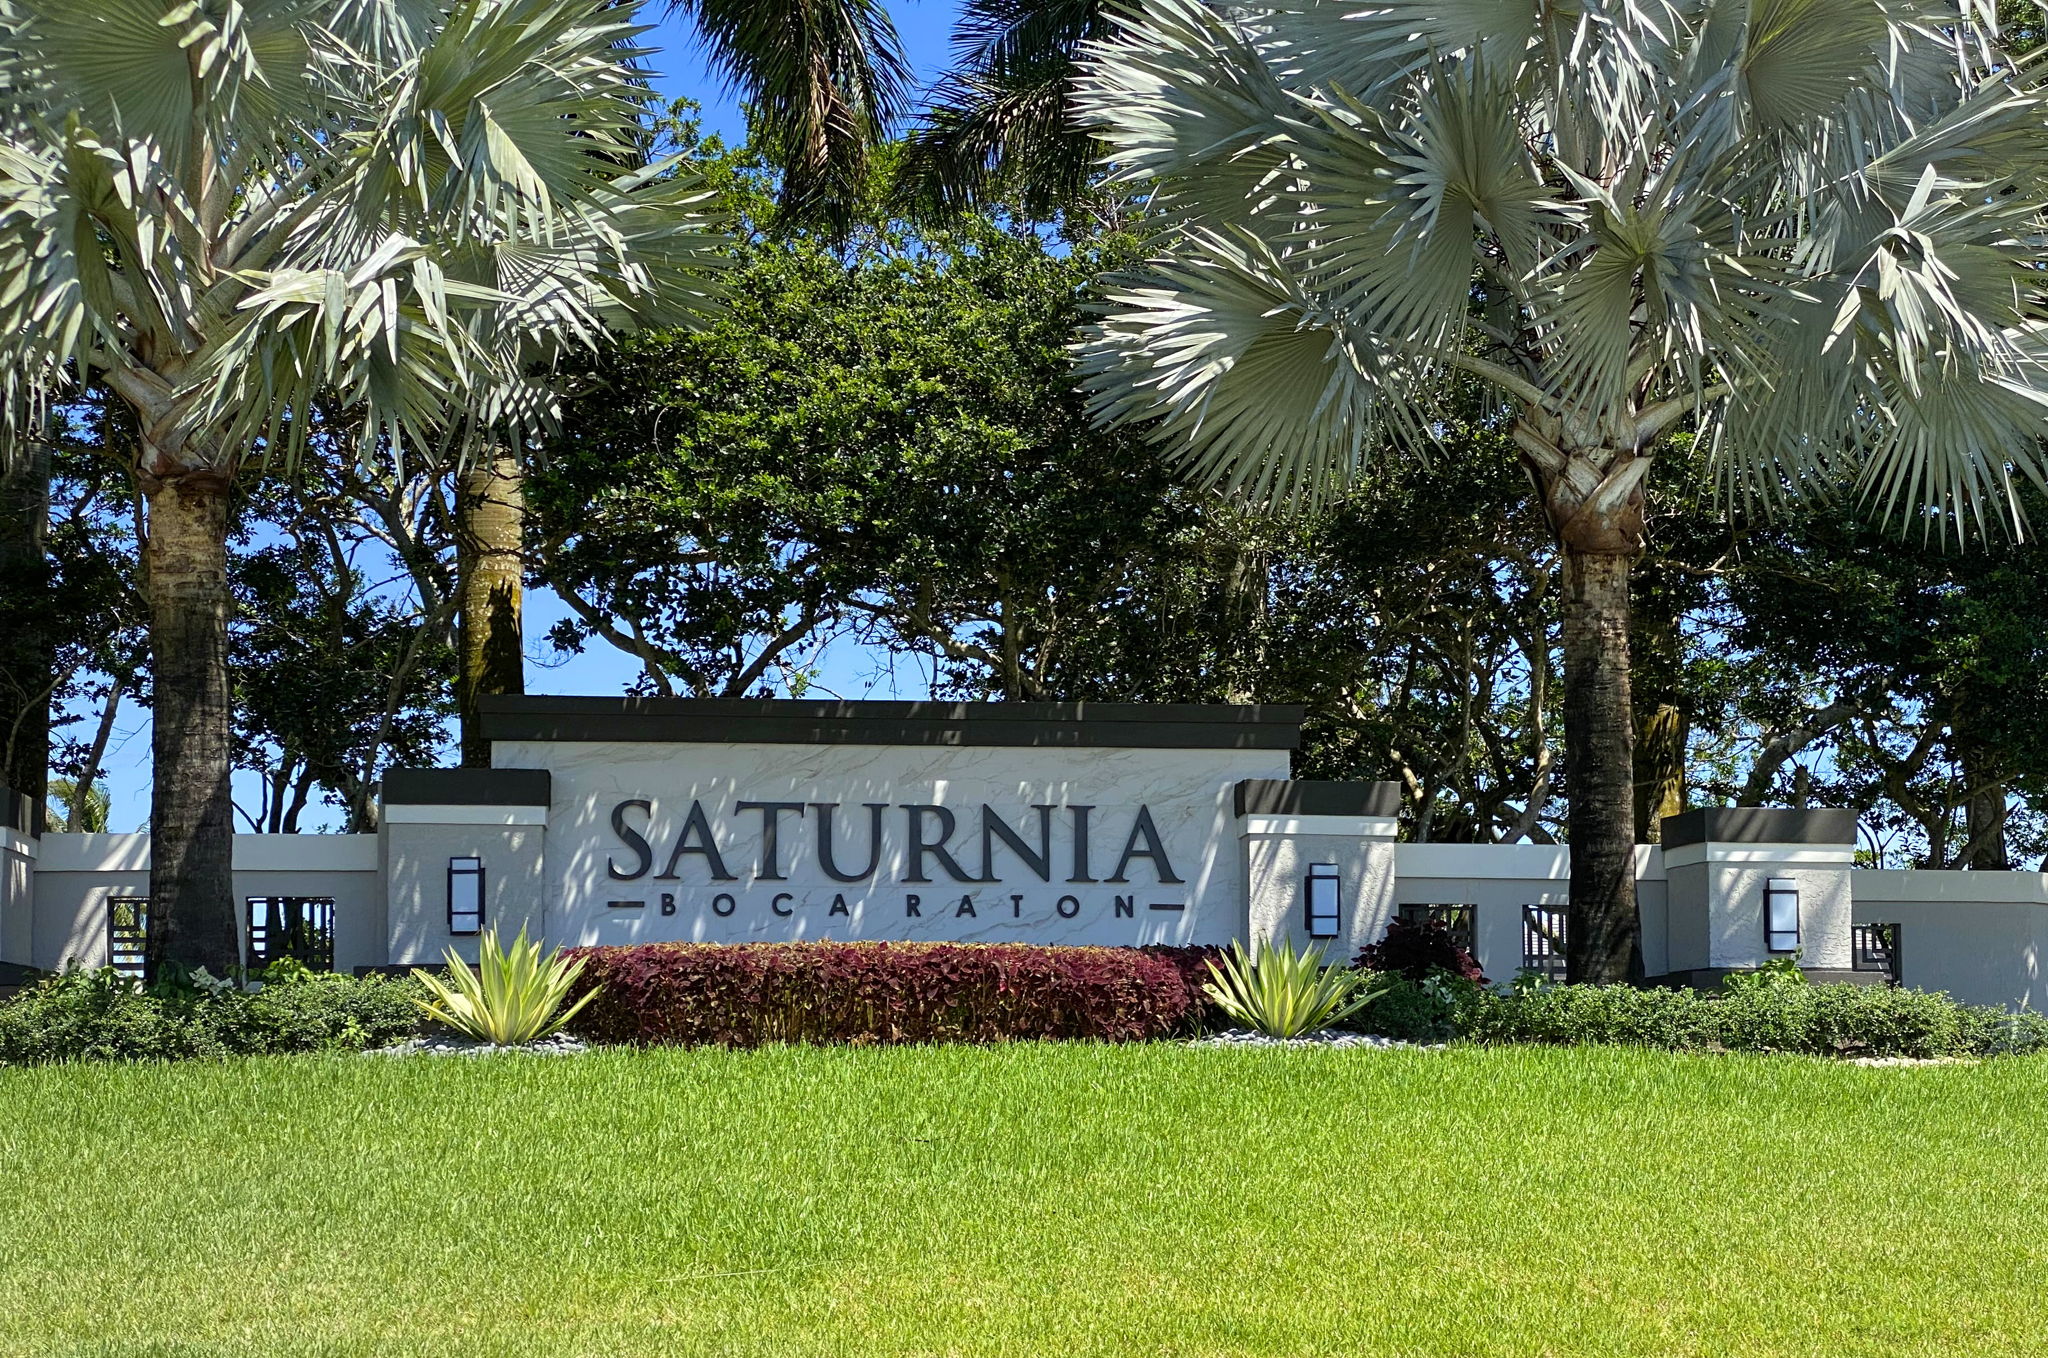 FRONT OF SATURNIA